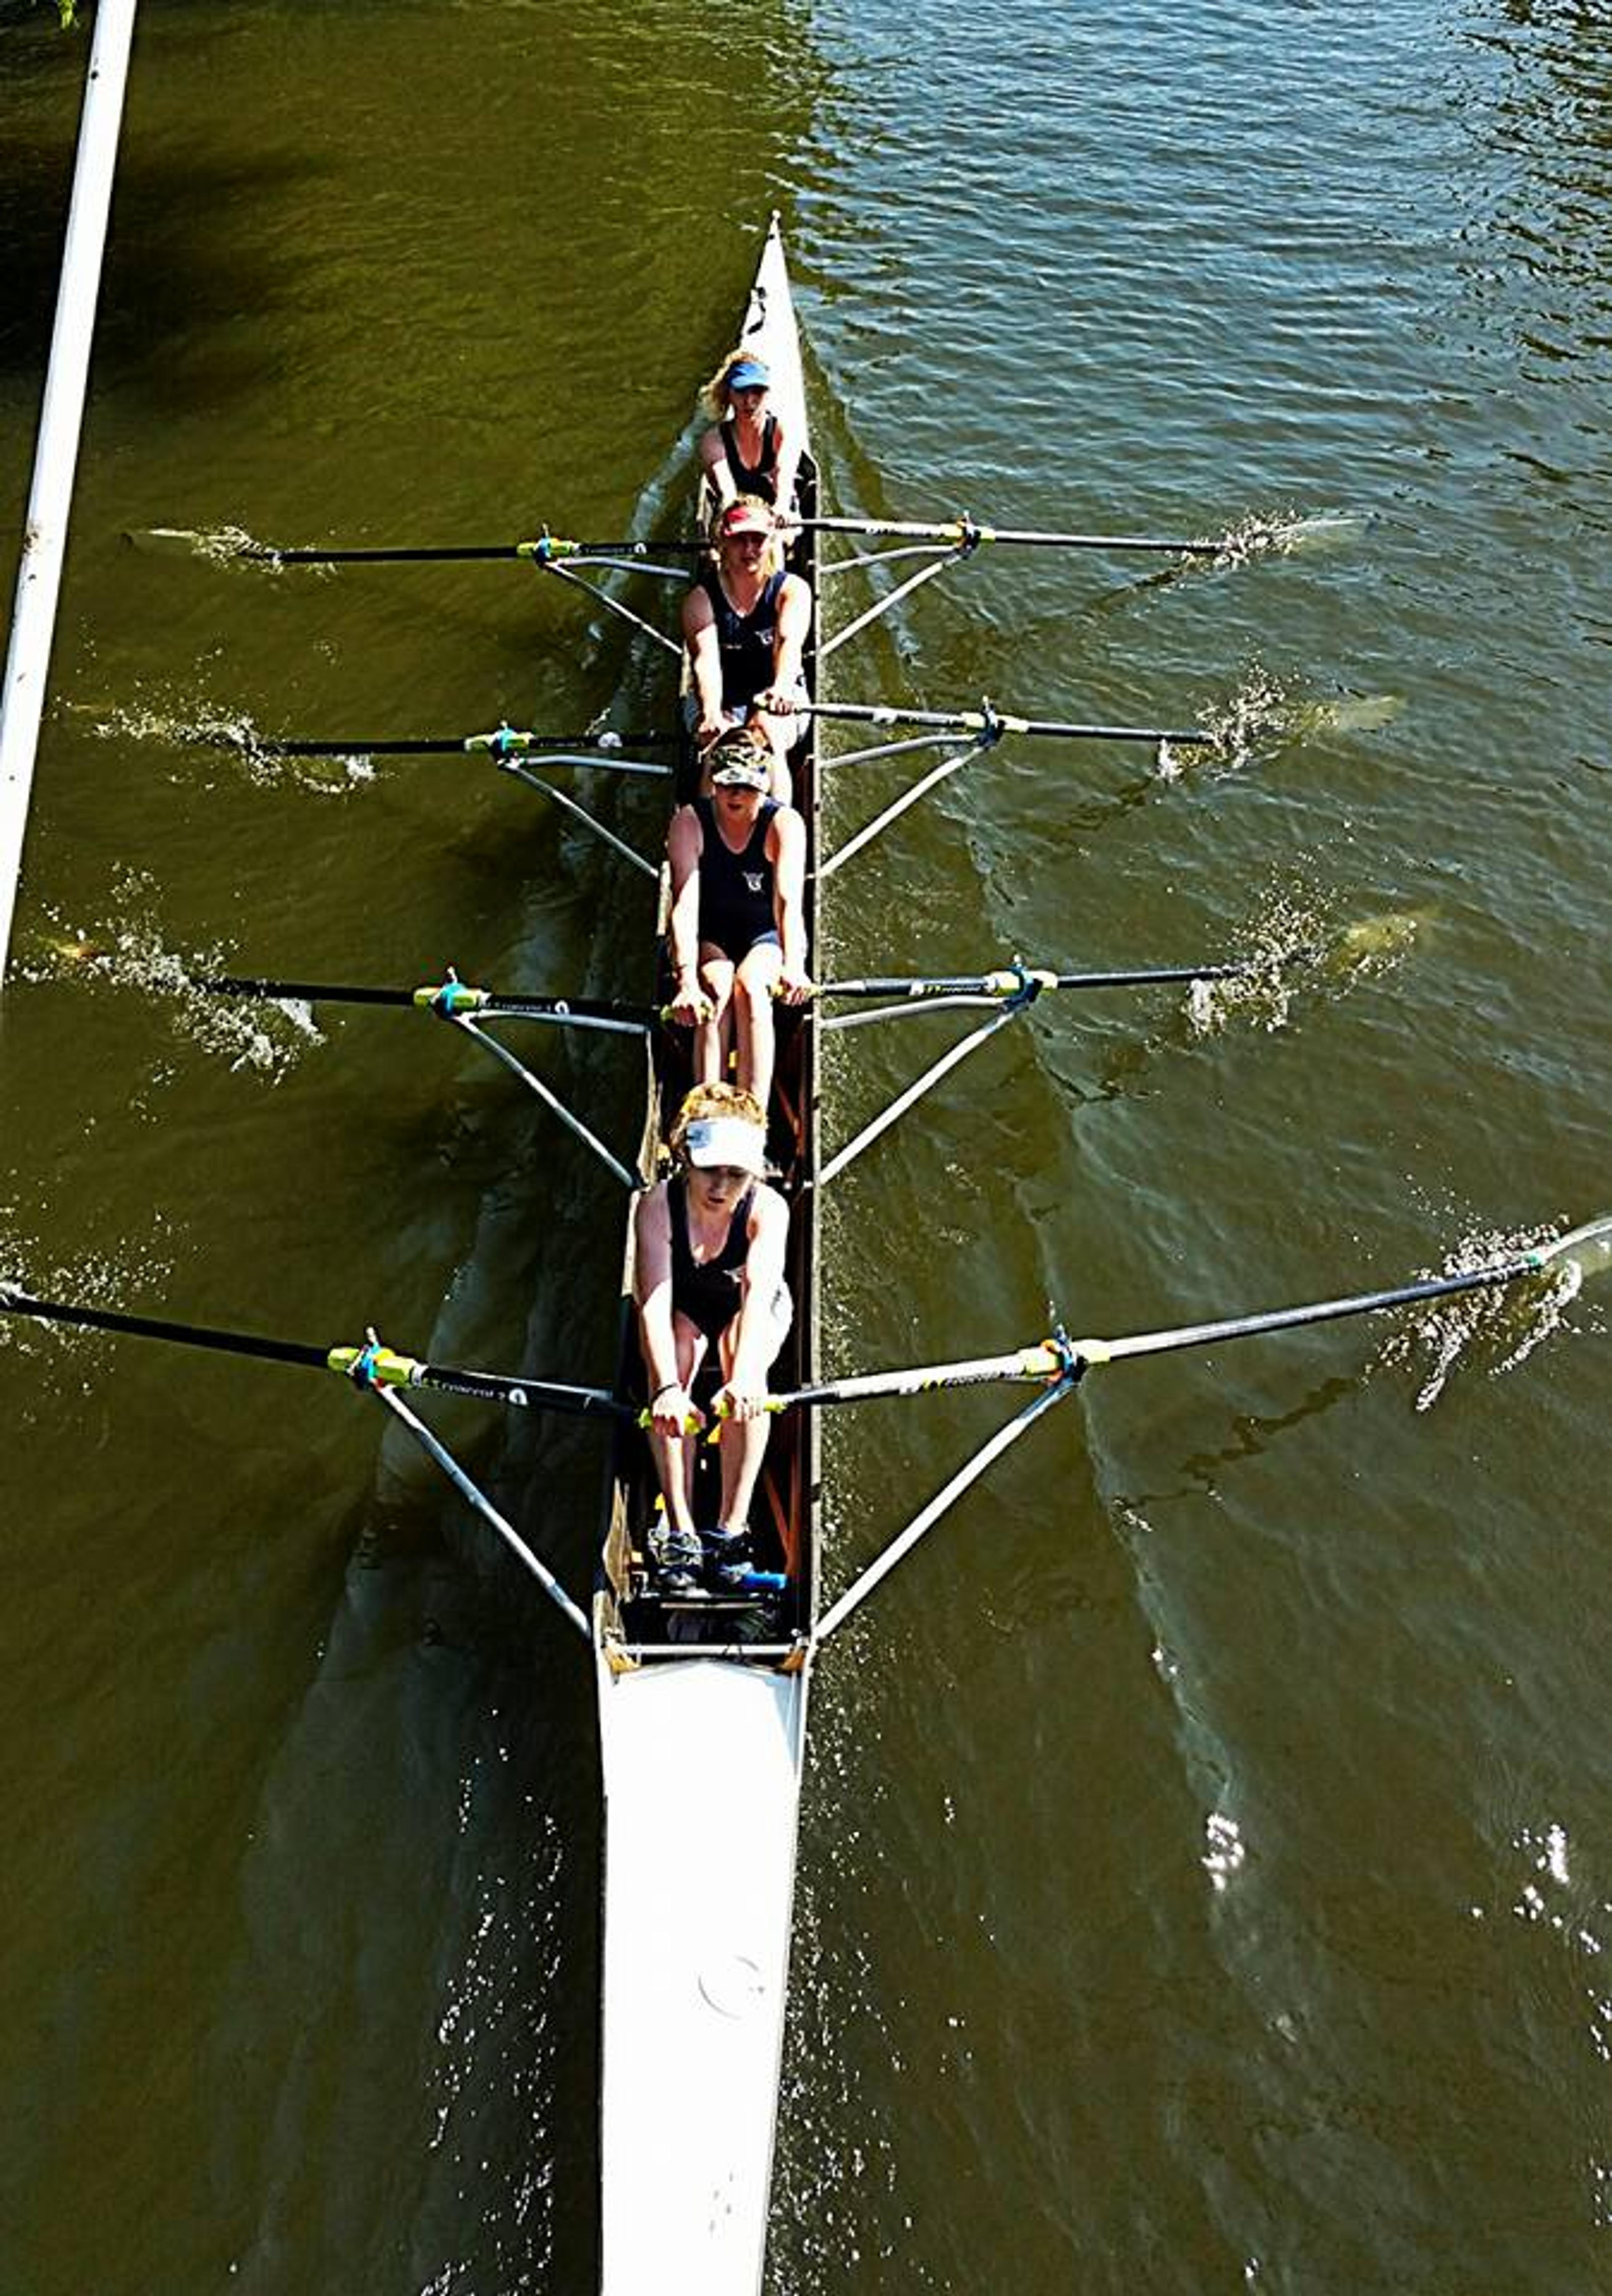 The tidy-looking ladies’ J18 quad passes under a bridge, skimming Bedford’s spectacularly khaki water.